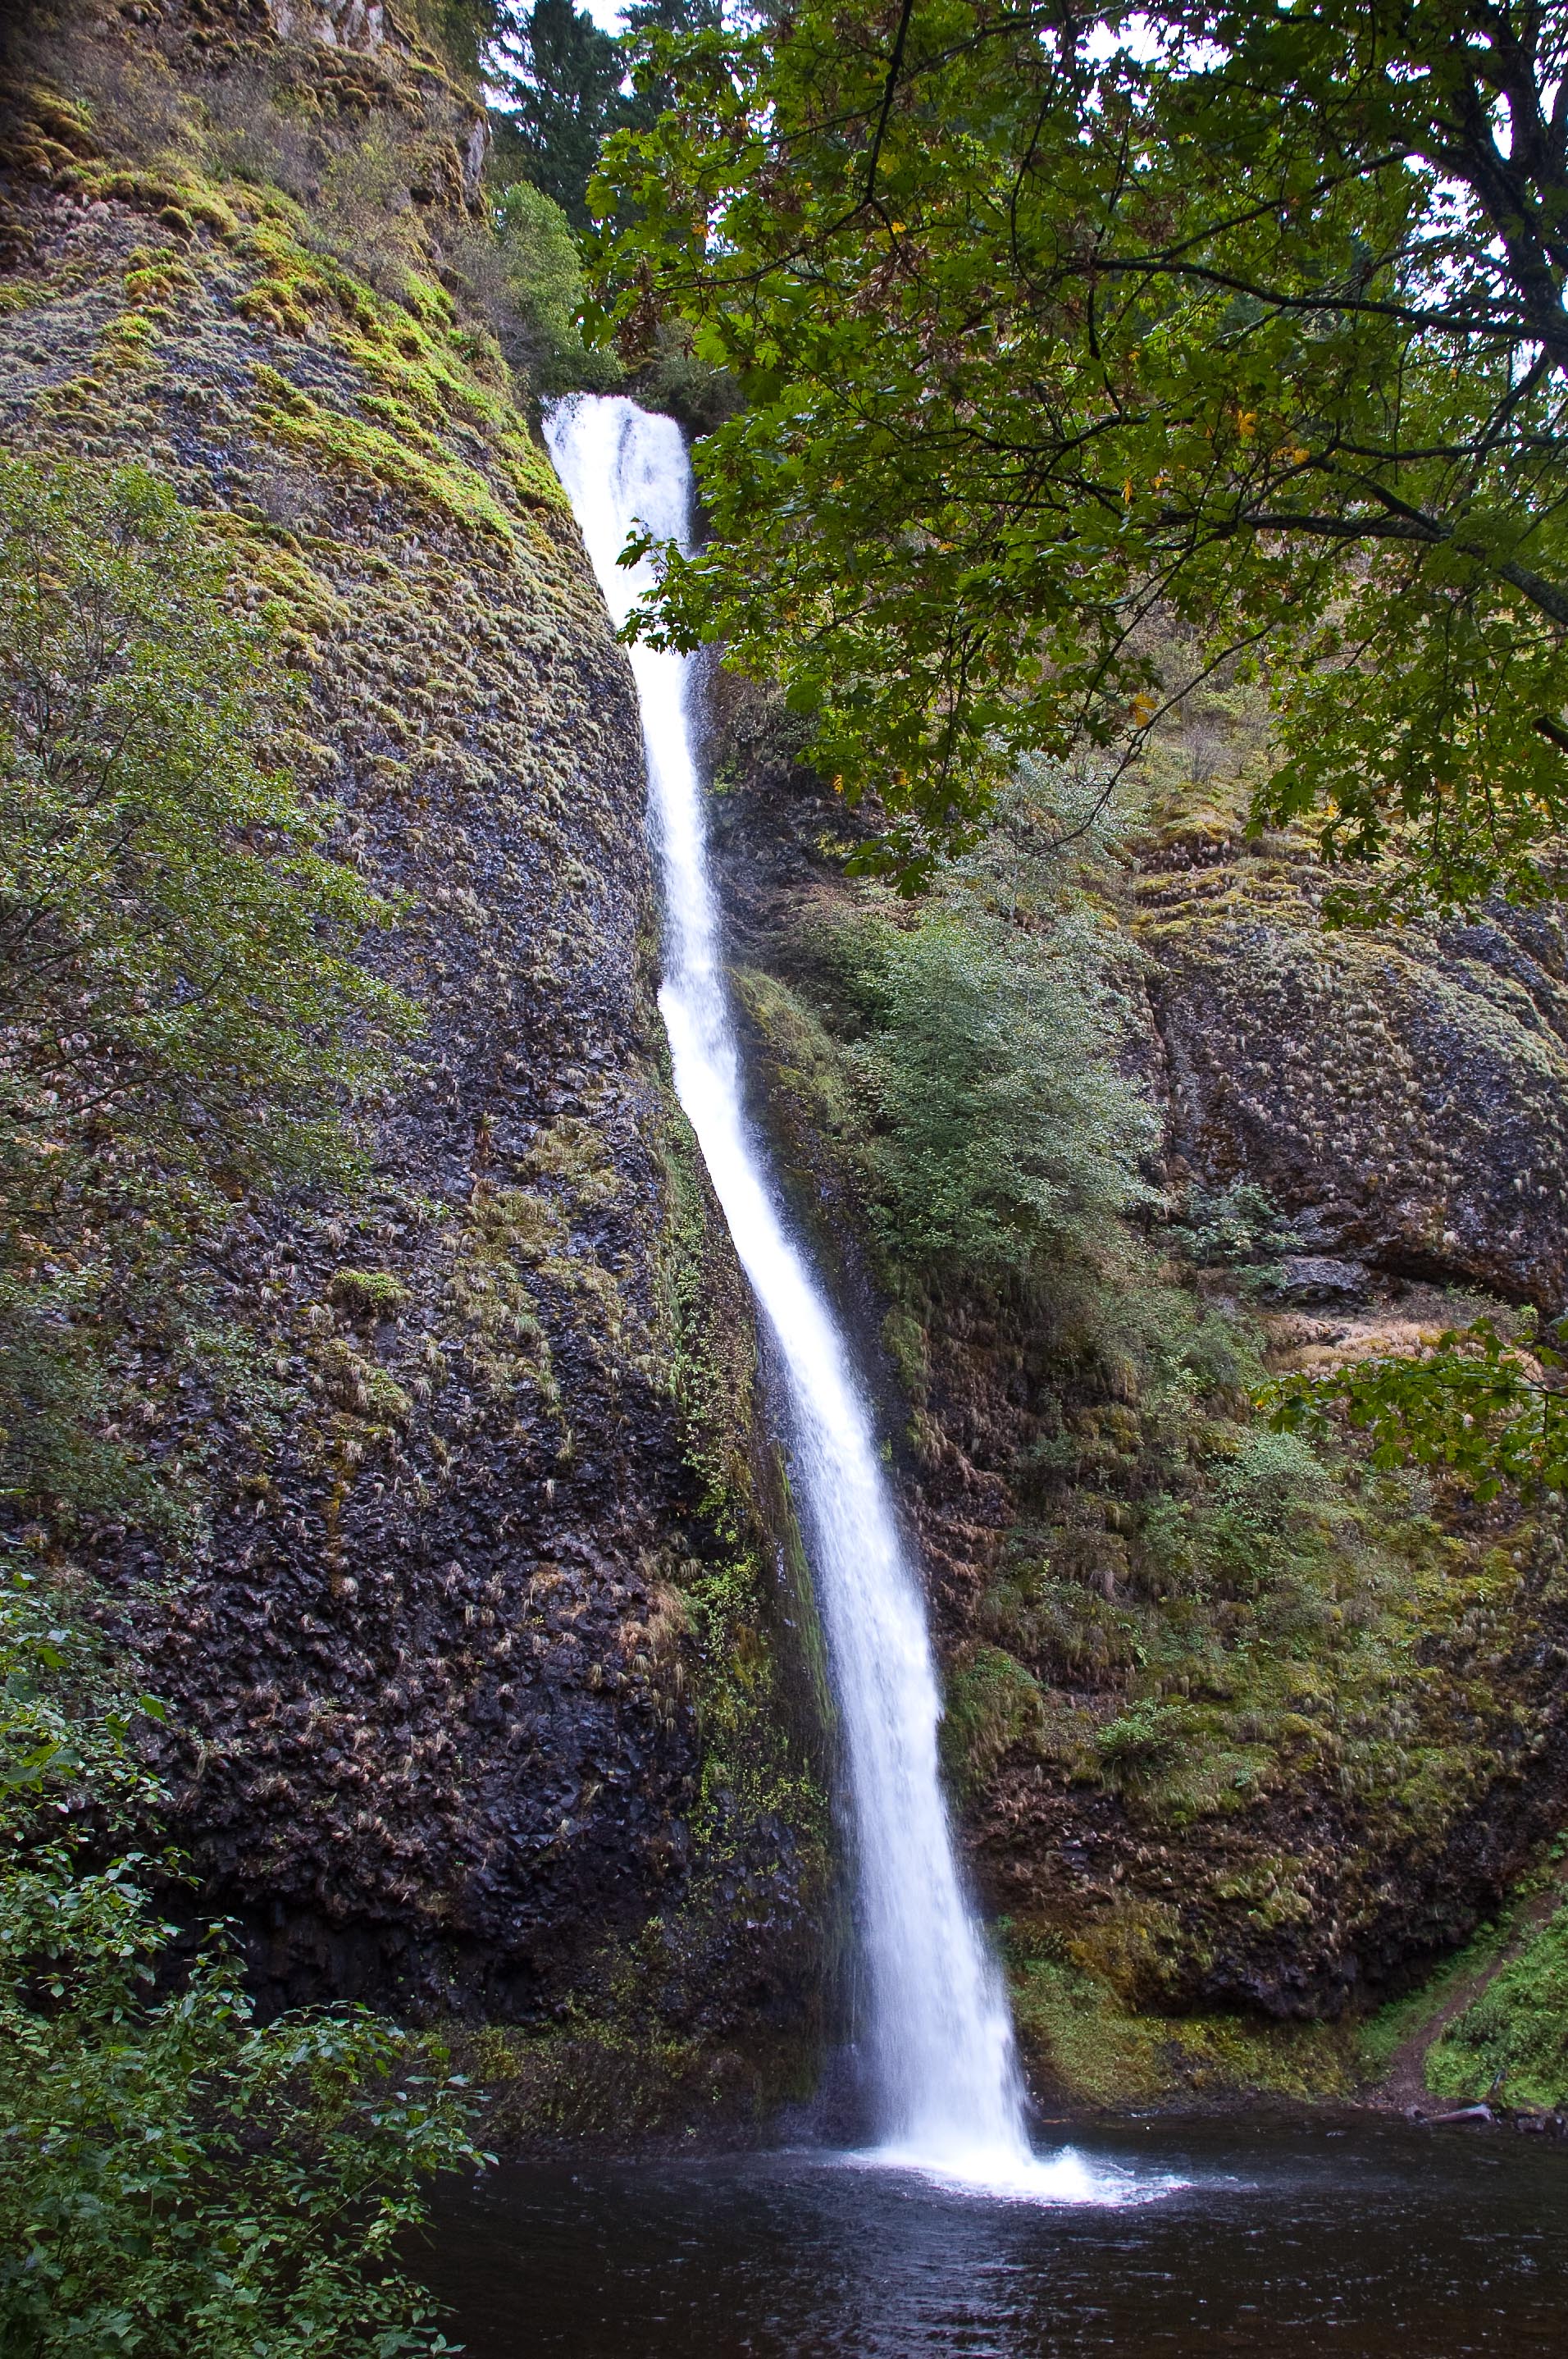 This is one of 4 types of waterfalls.